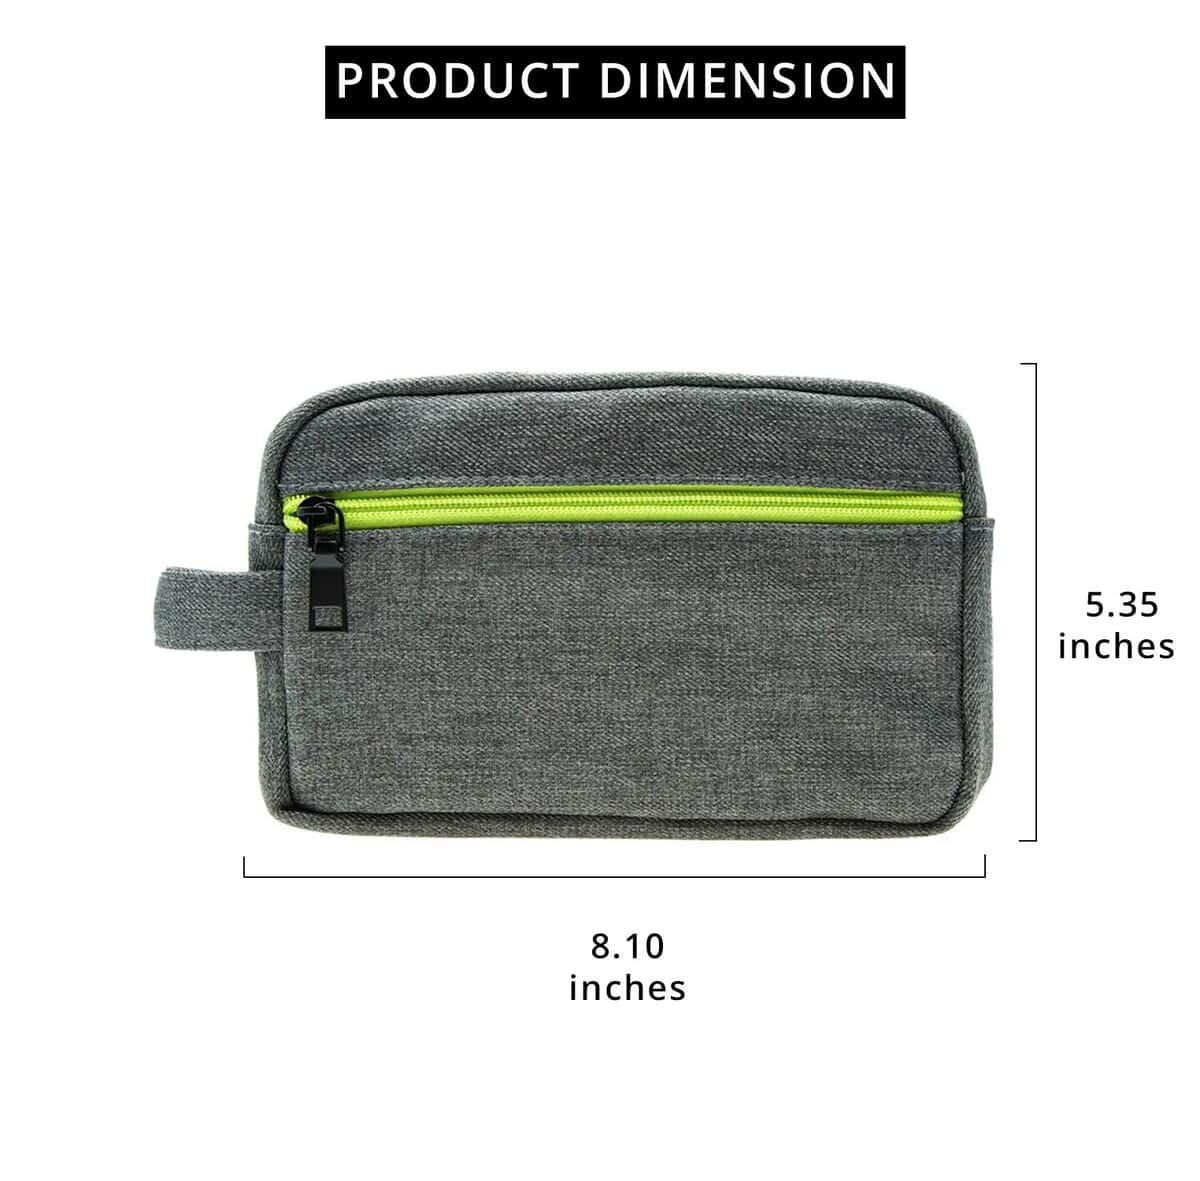 Gray Canvas Textured Dopp Kit With Lime Green Zipper, Men's Dopp Kit Bag, Best Dopp Kit, Travel Organizer for Accessories and Toiletries, Men's Toiletry Bag image number 5